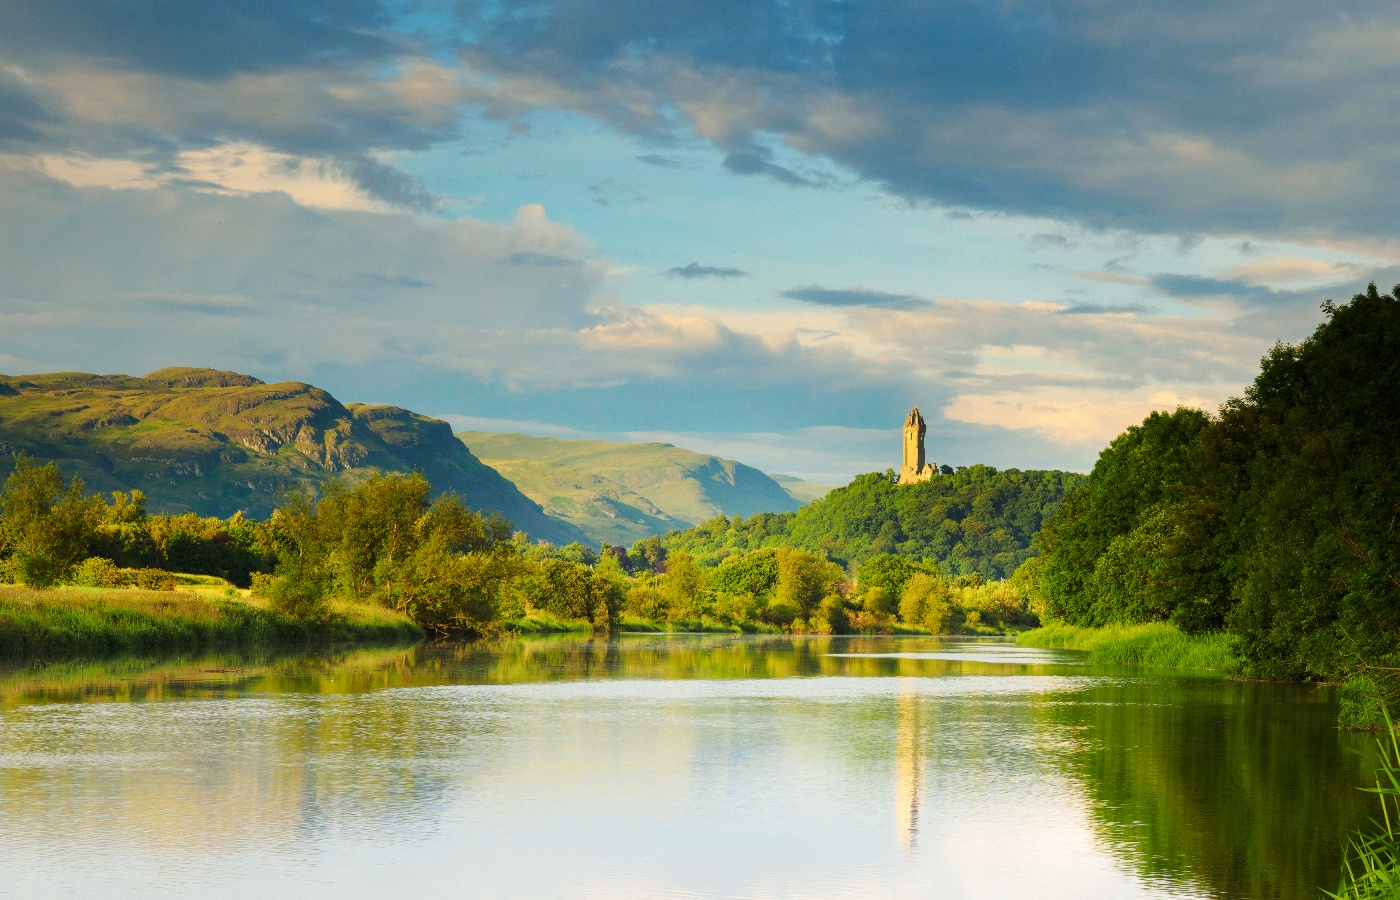 The River Forth, Stirling looking towards the Wallace's monument.